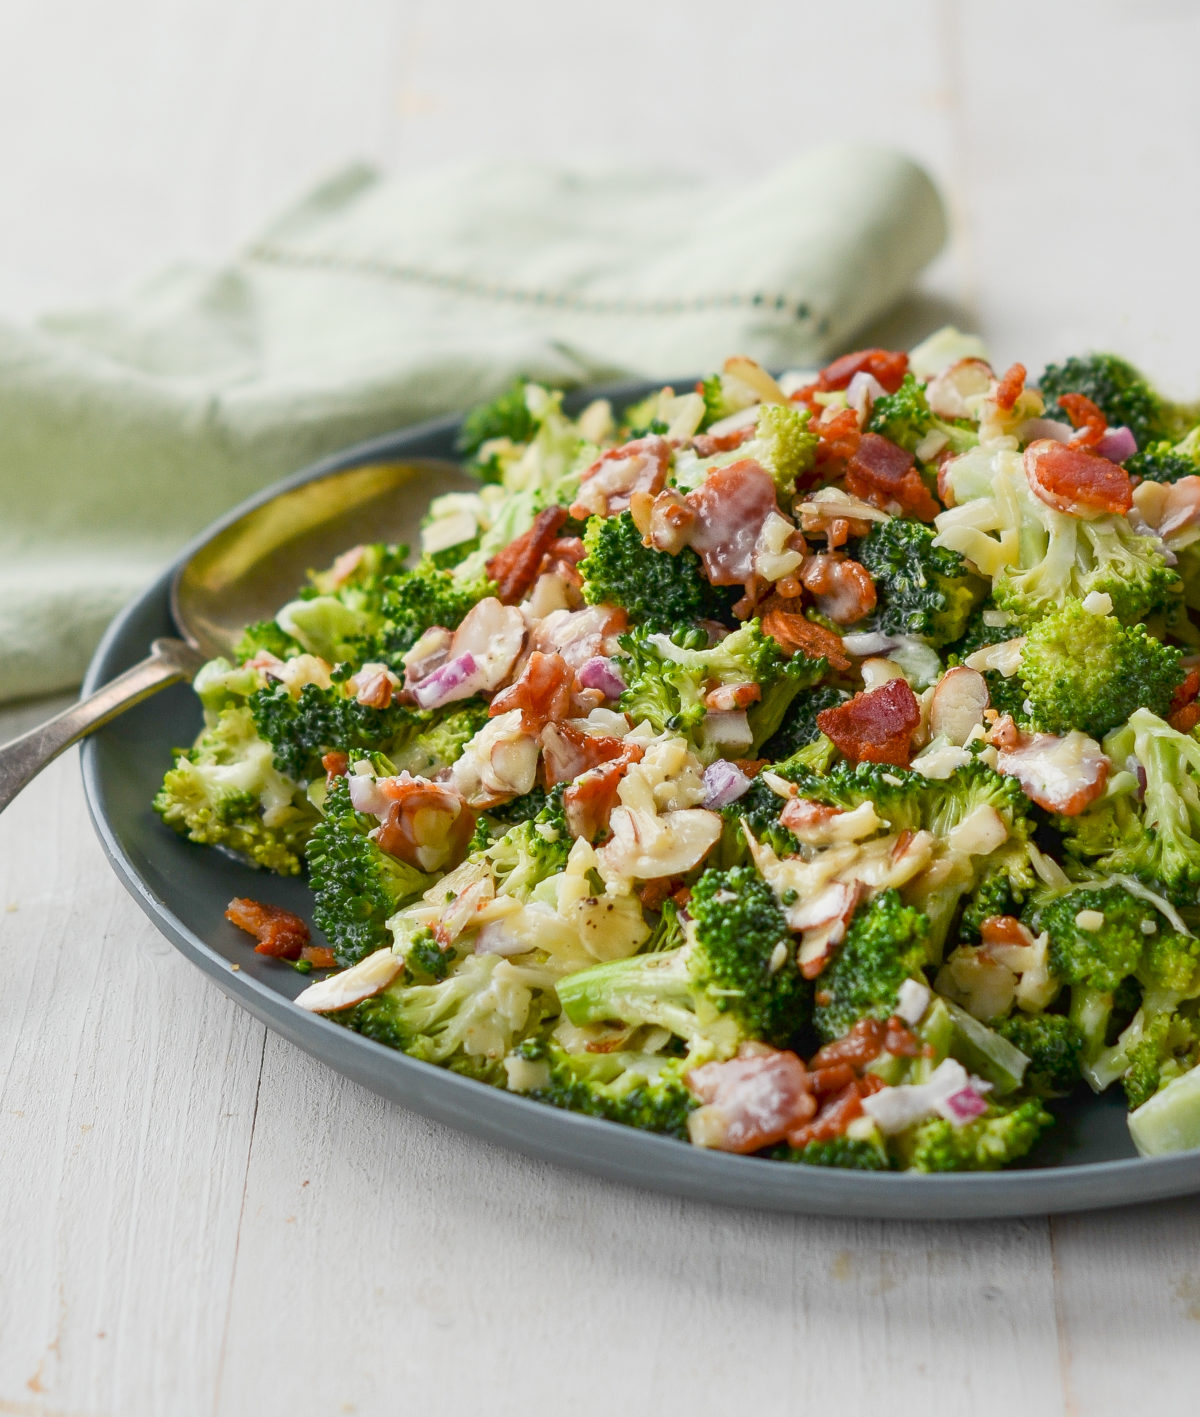 Broccoli Salad with Bacon, Cheddar & Almonds - Once Upon a Chef